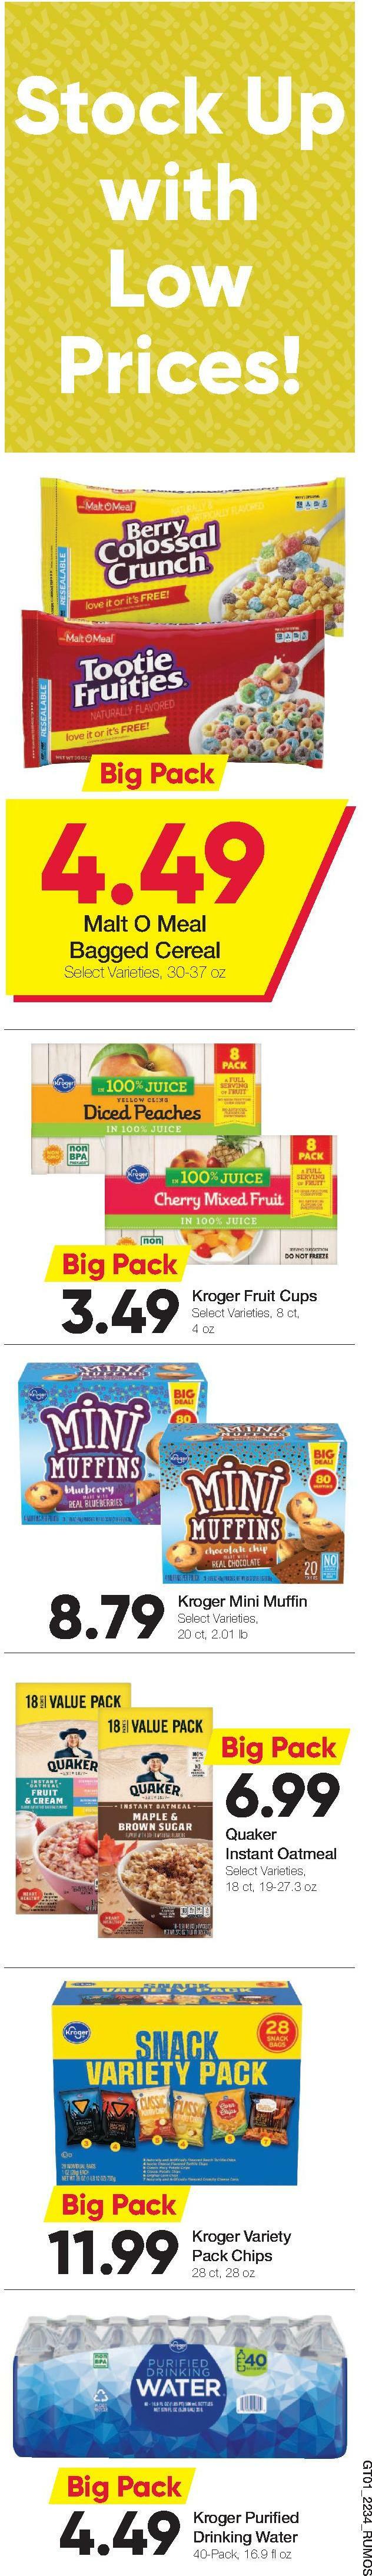 Ruler Foods Weekly Ad from September 21